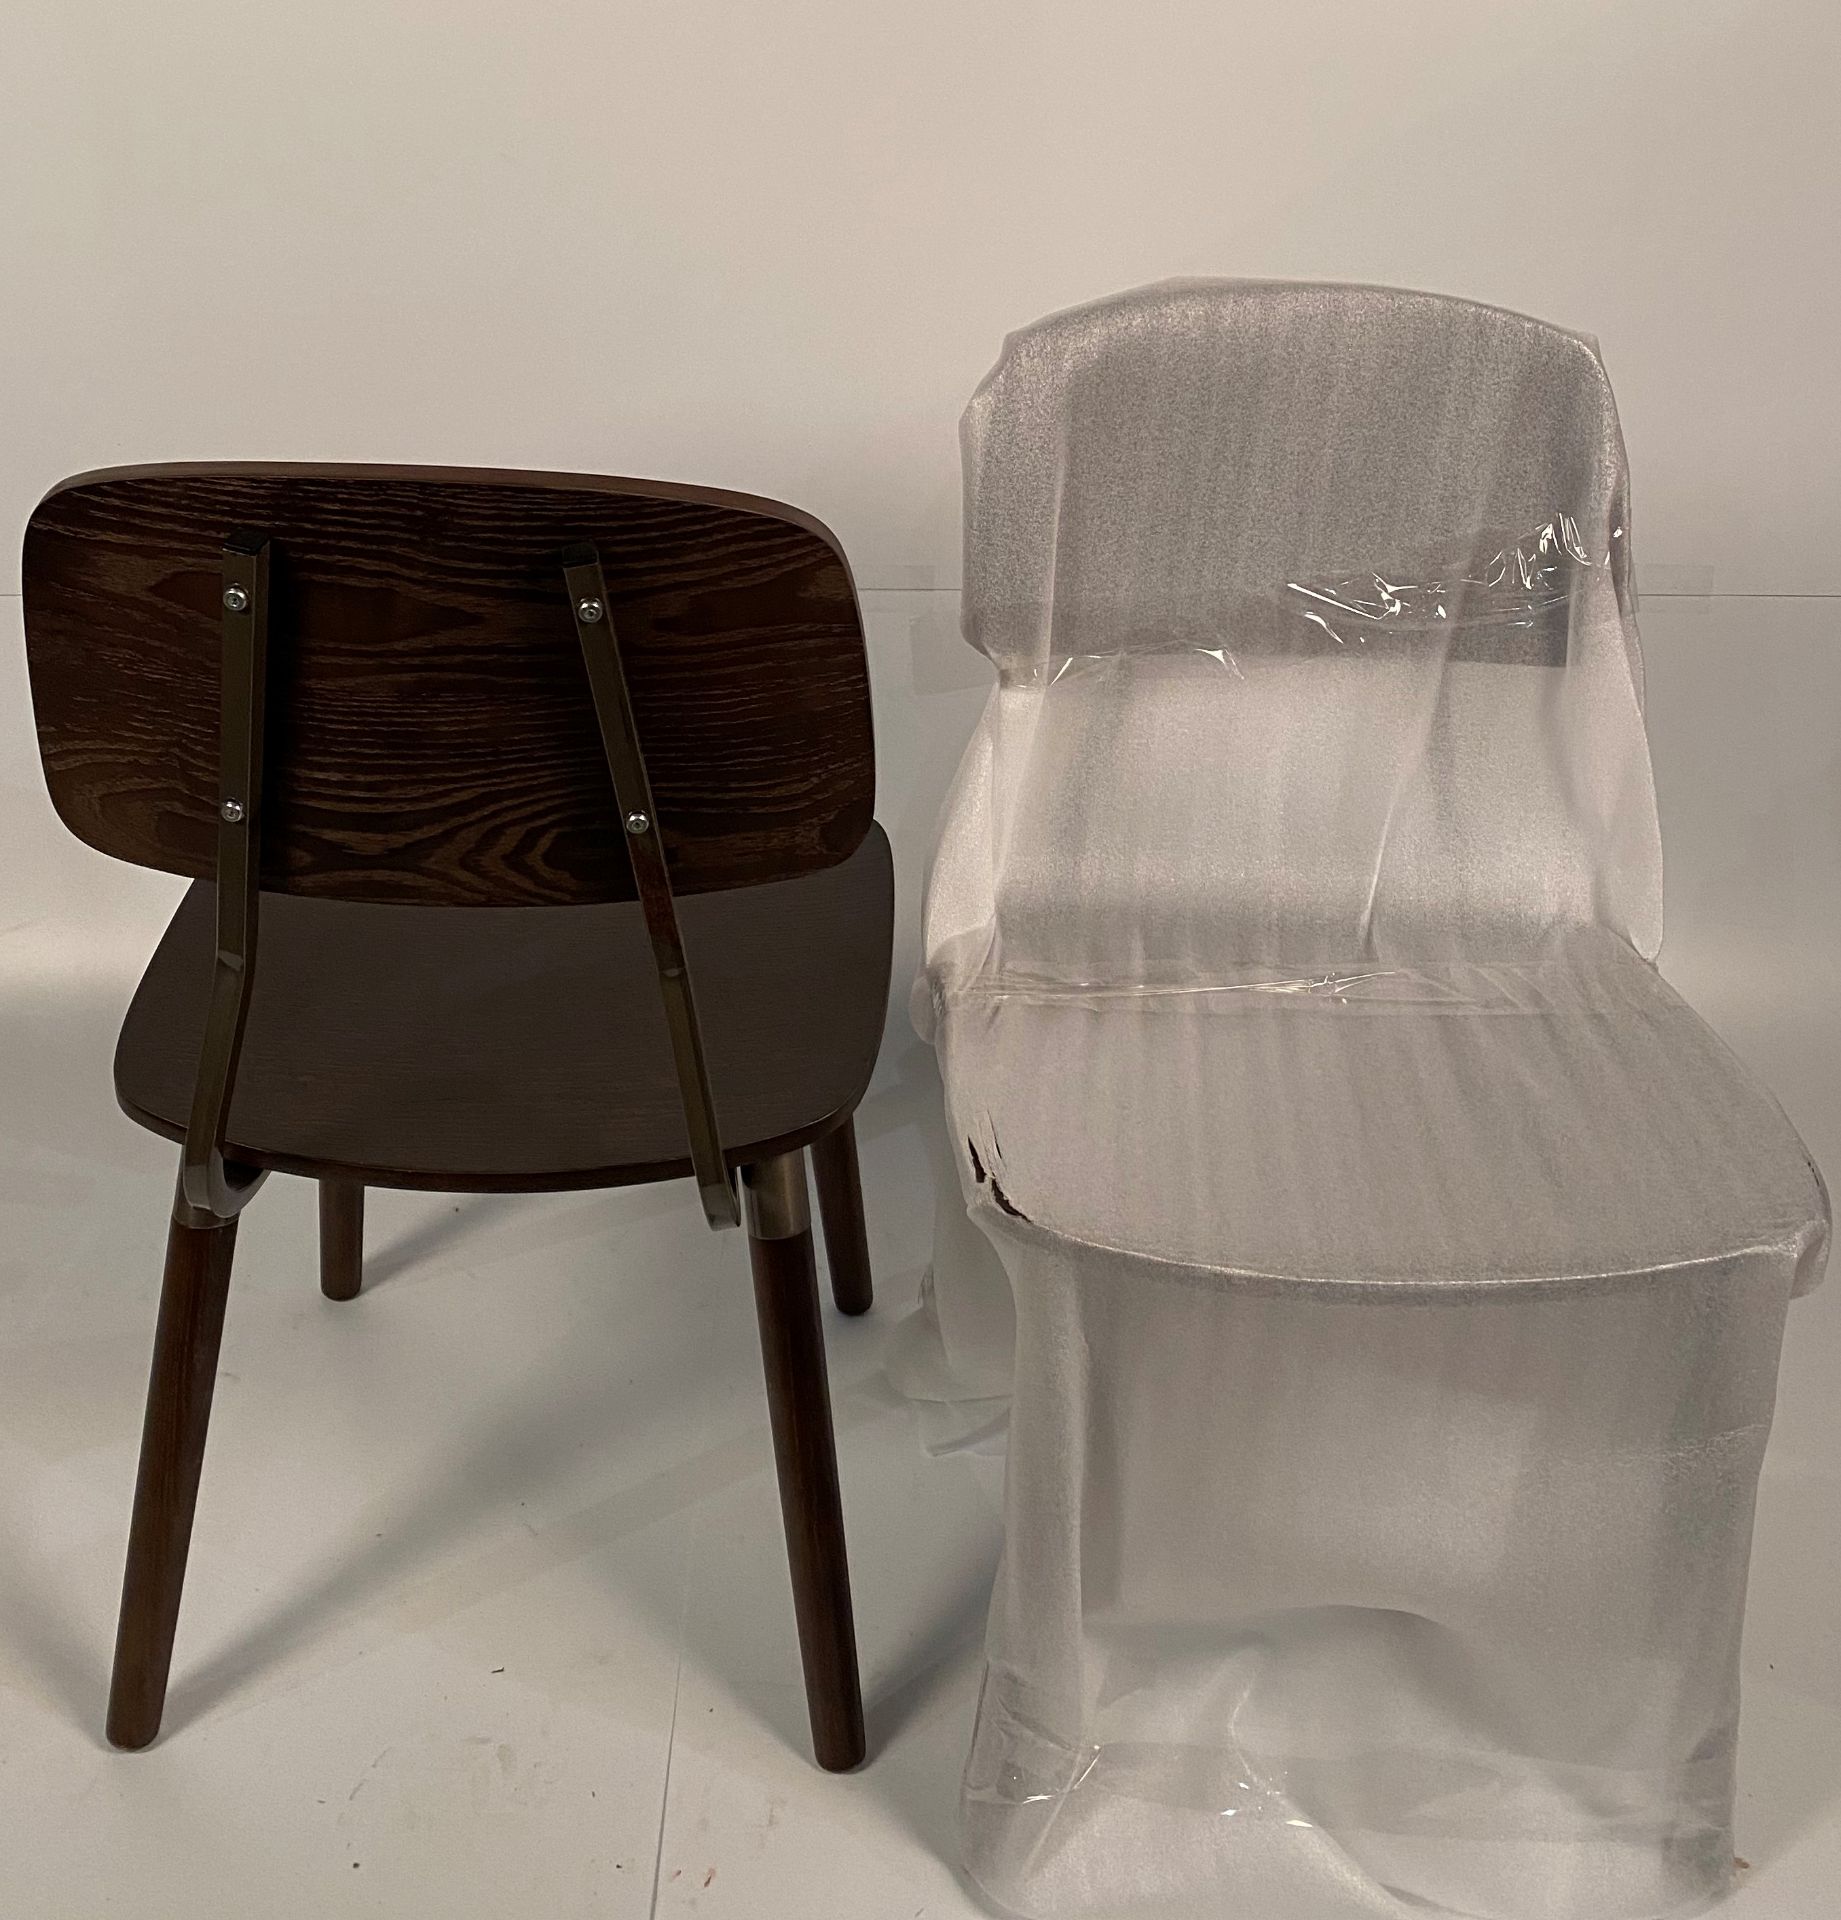 2 x Dart wooden chairs - Image 3 of 4